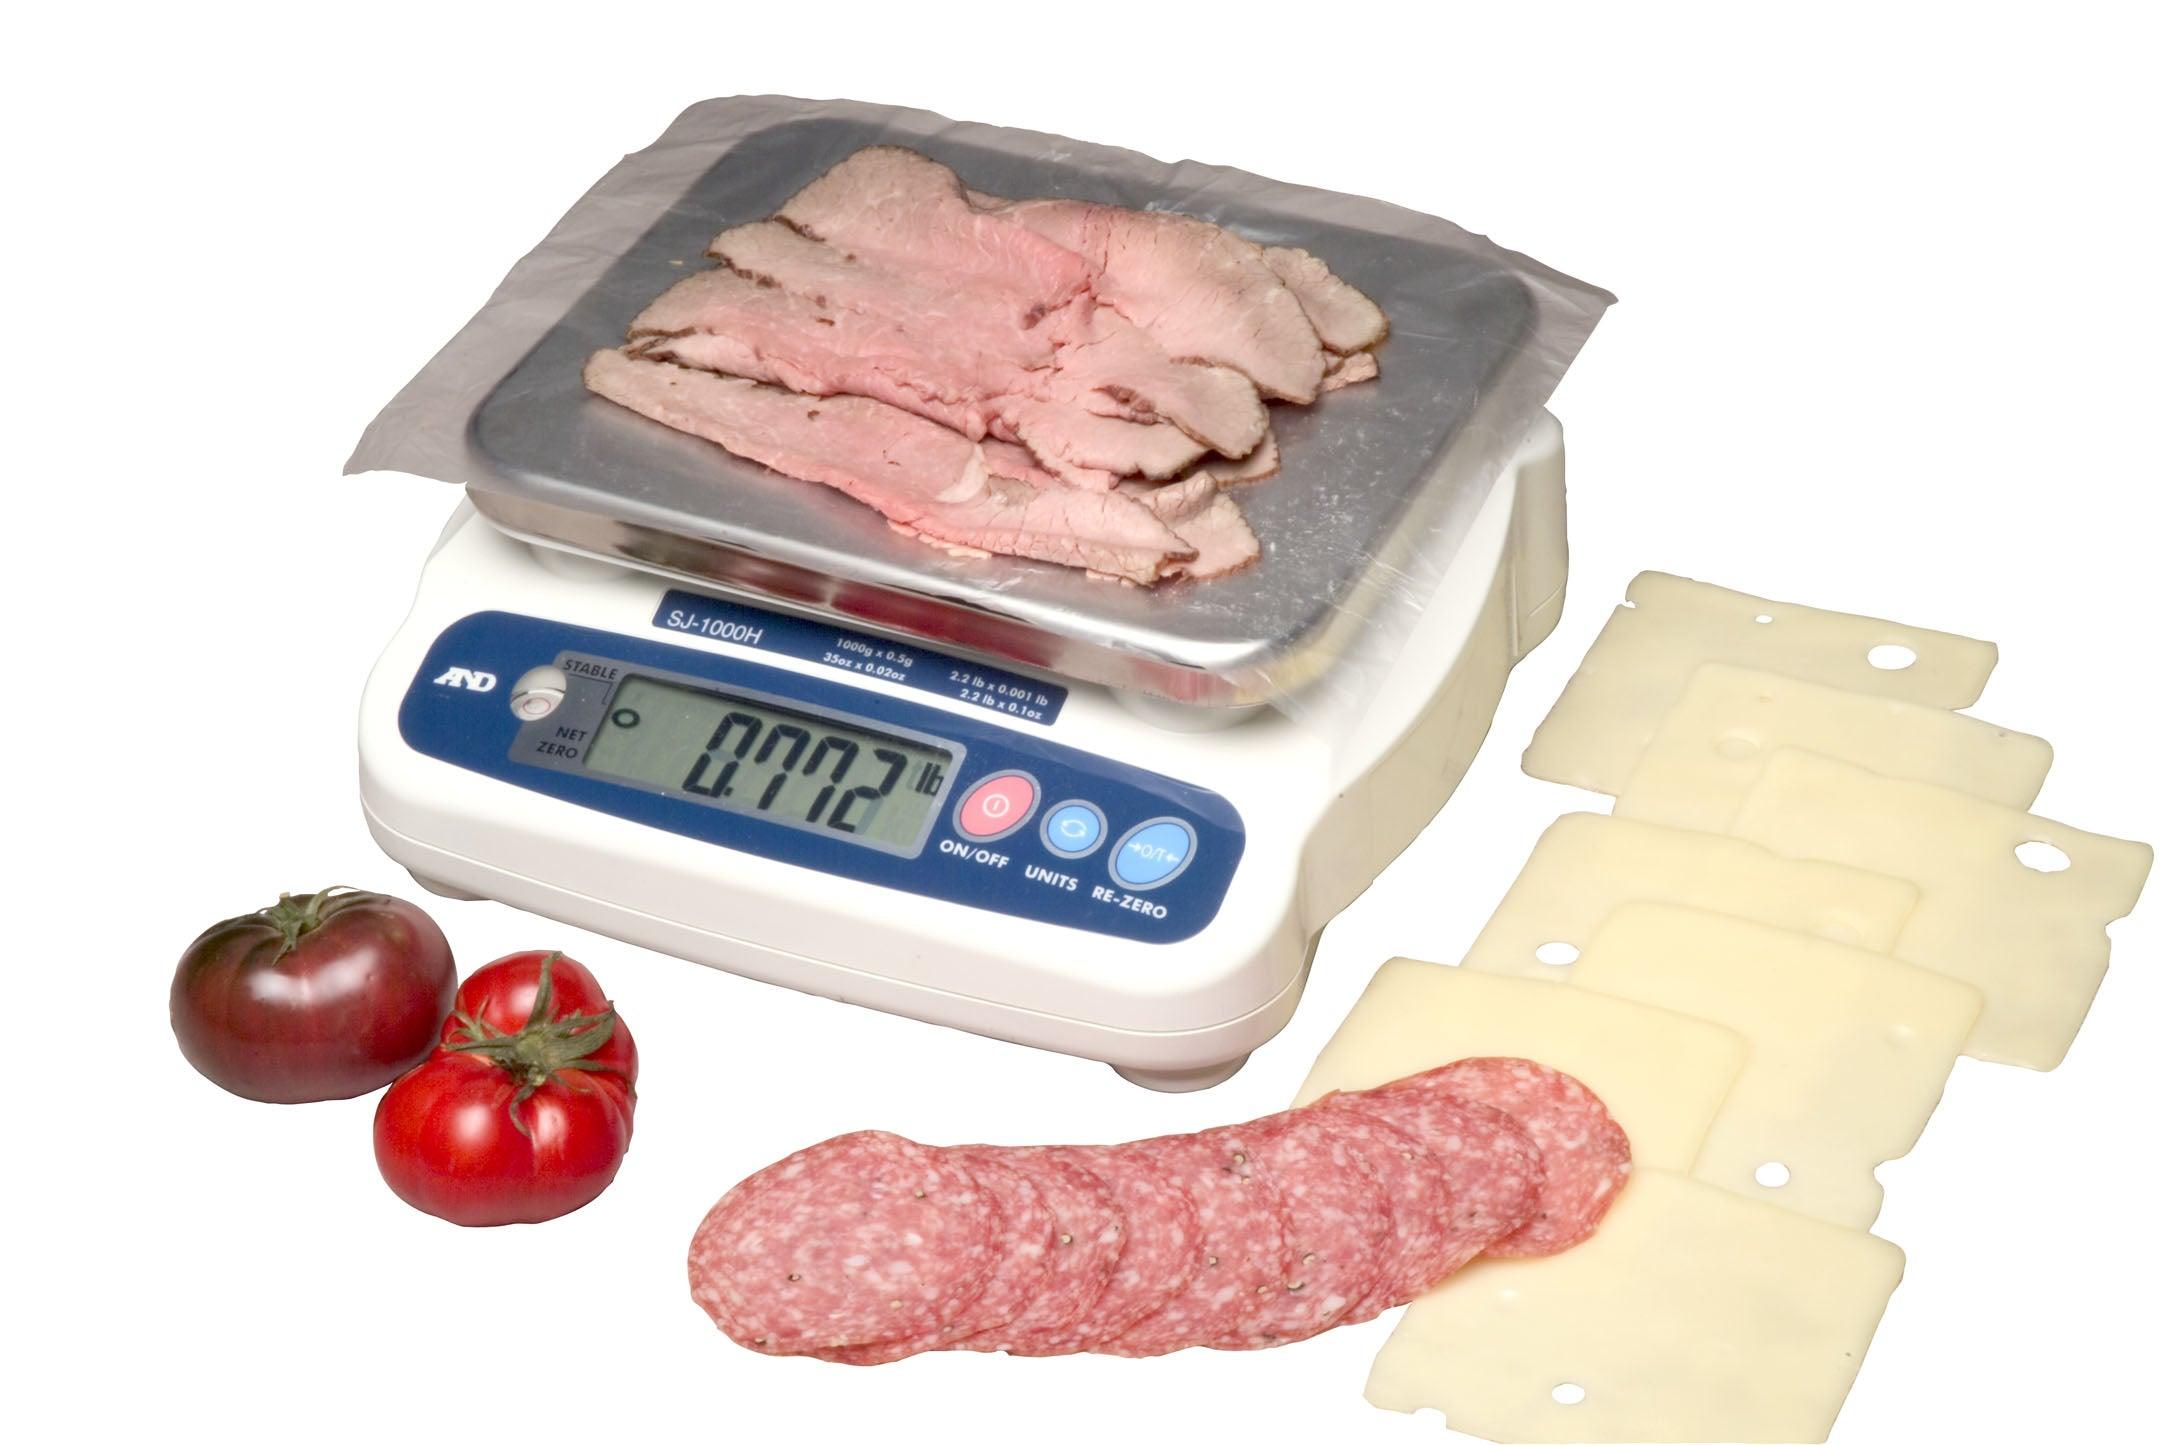 A&D Weighing SJ-2000HS Compact Bench Scale, 4.4lb x 0.002lb, NSF Listed with Warranty